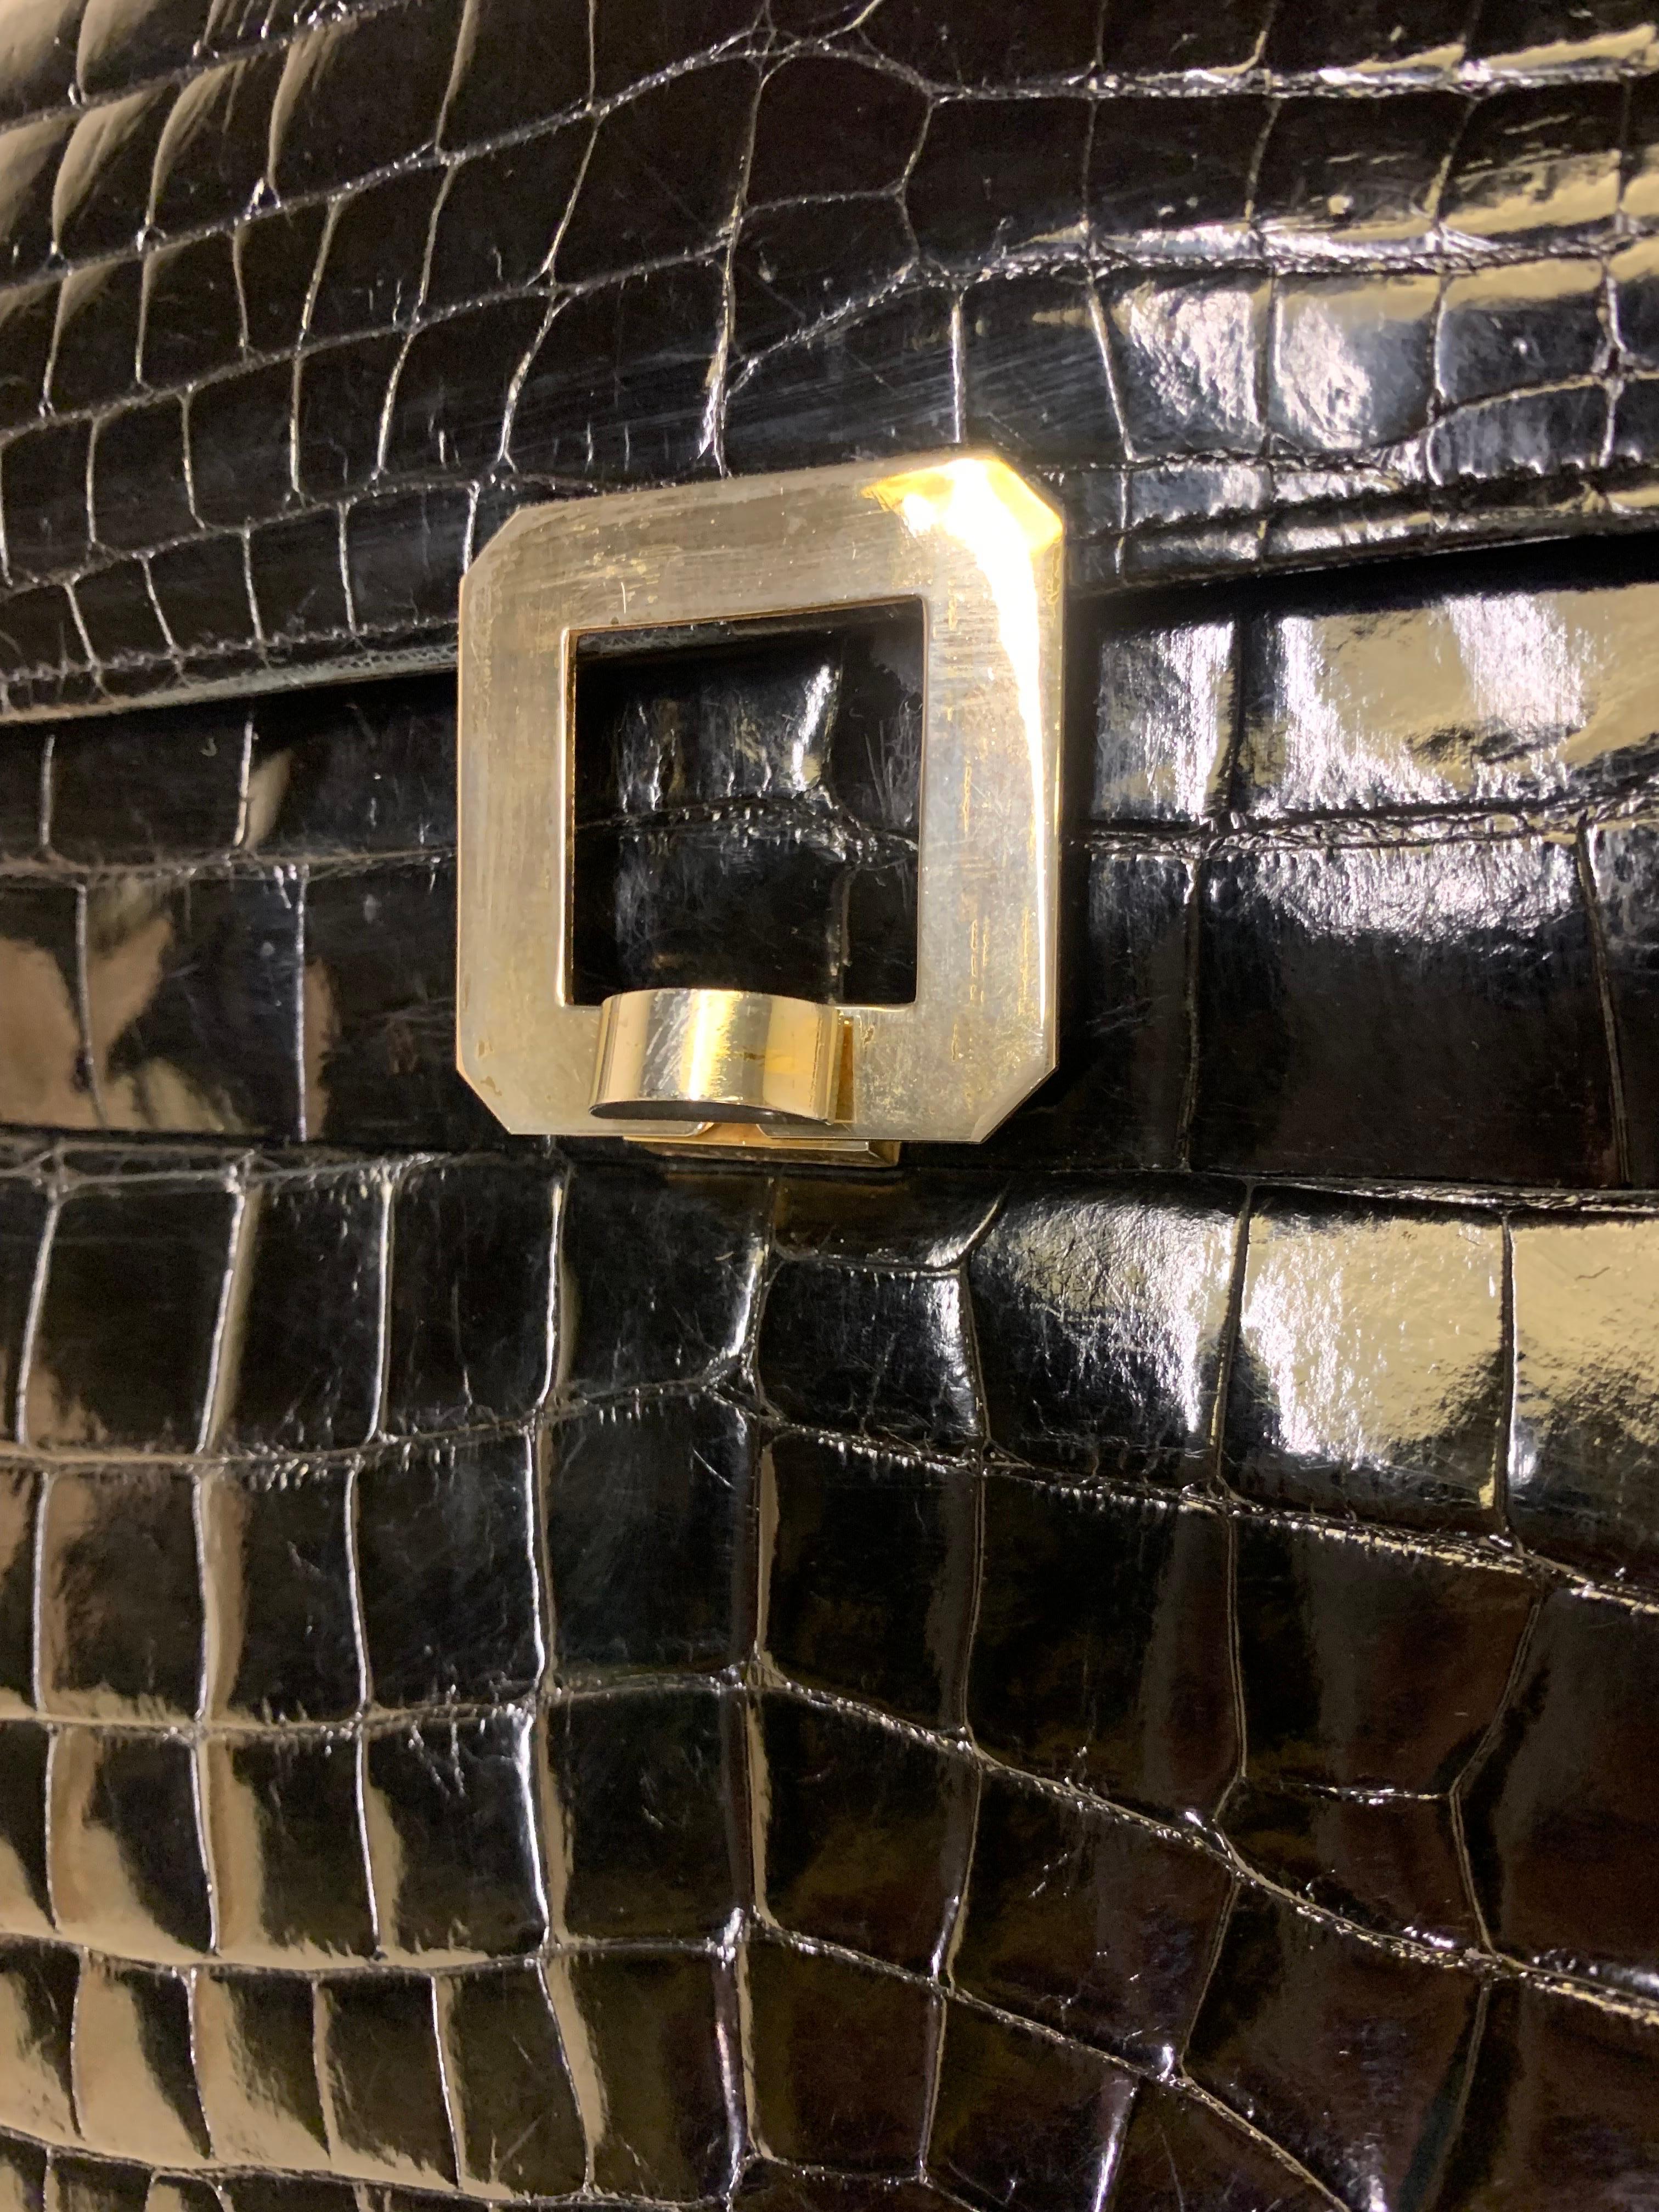 1960s Genuine black center-belly alligator skin handbag: Tailored, accordian-pleated and structured with a padded handle, front flap closure and brushed silver-tone buckle. Medium sized. Excellent condition. 